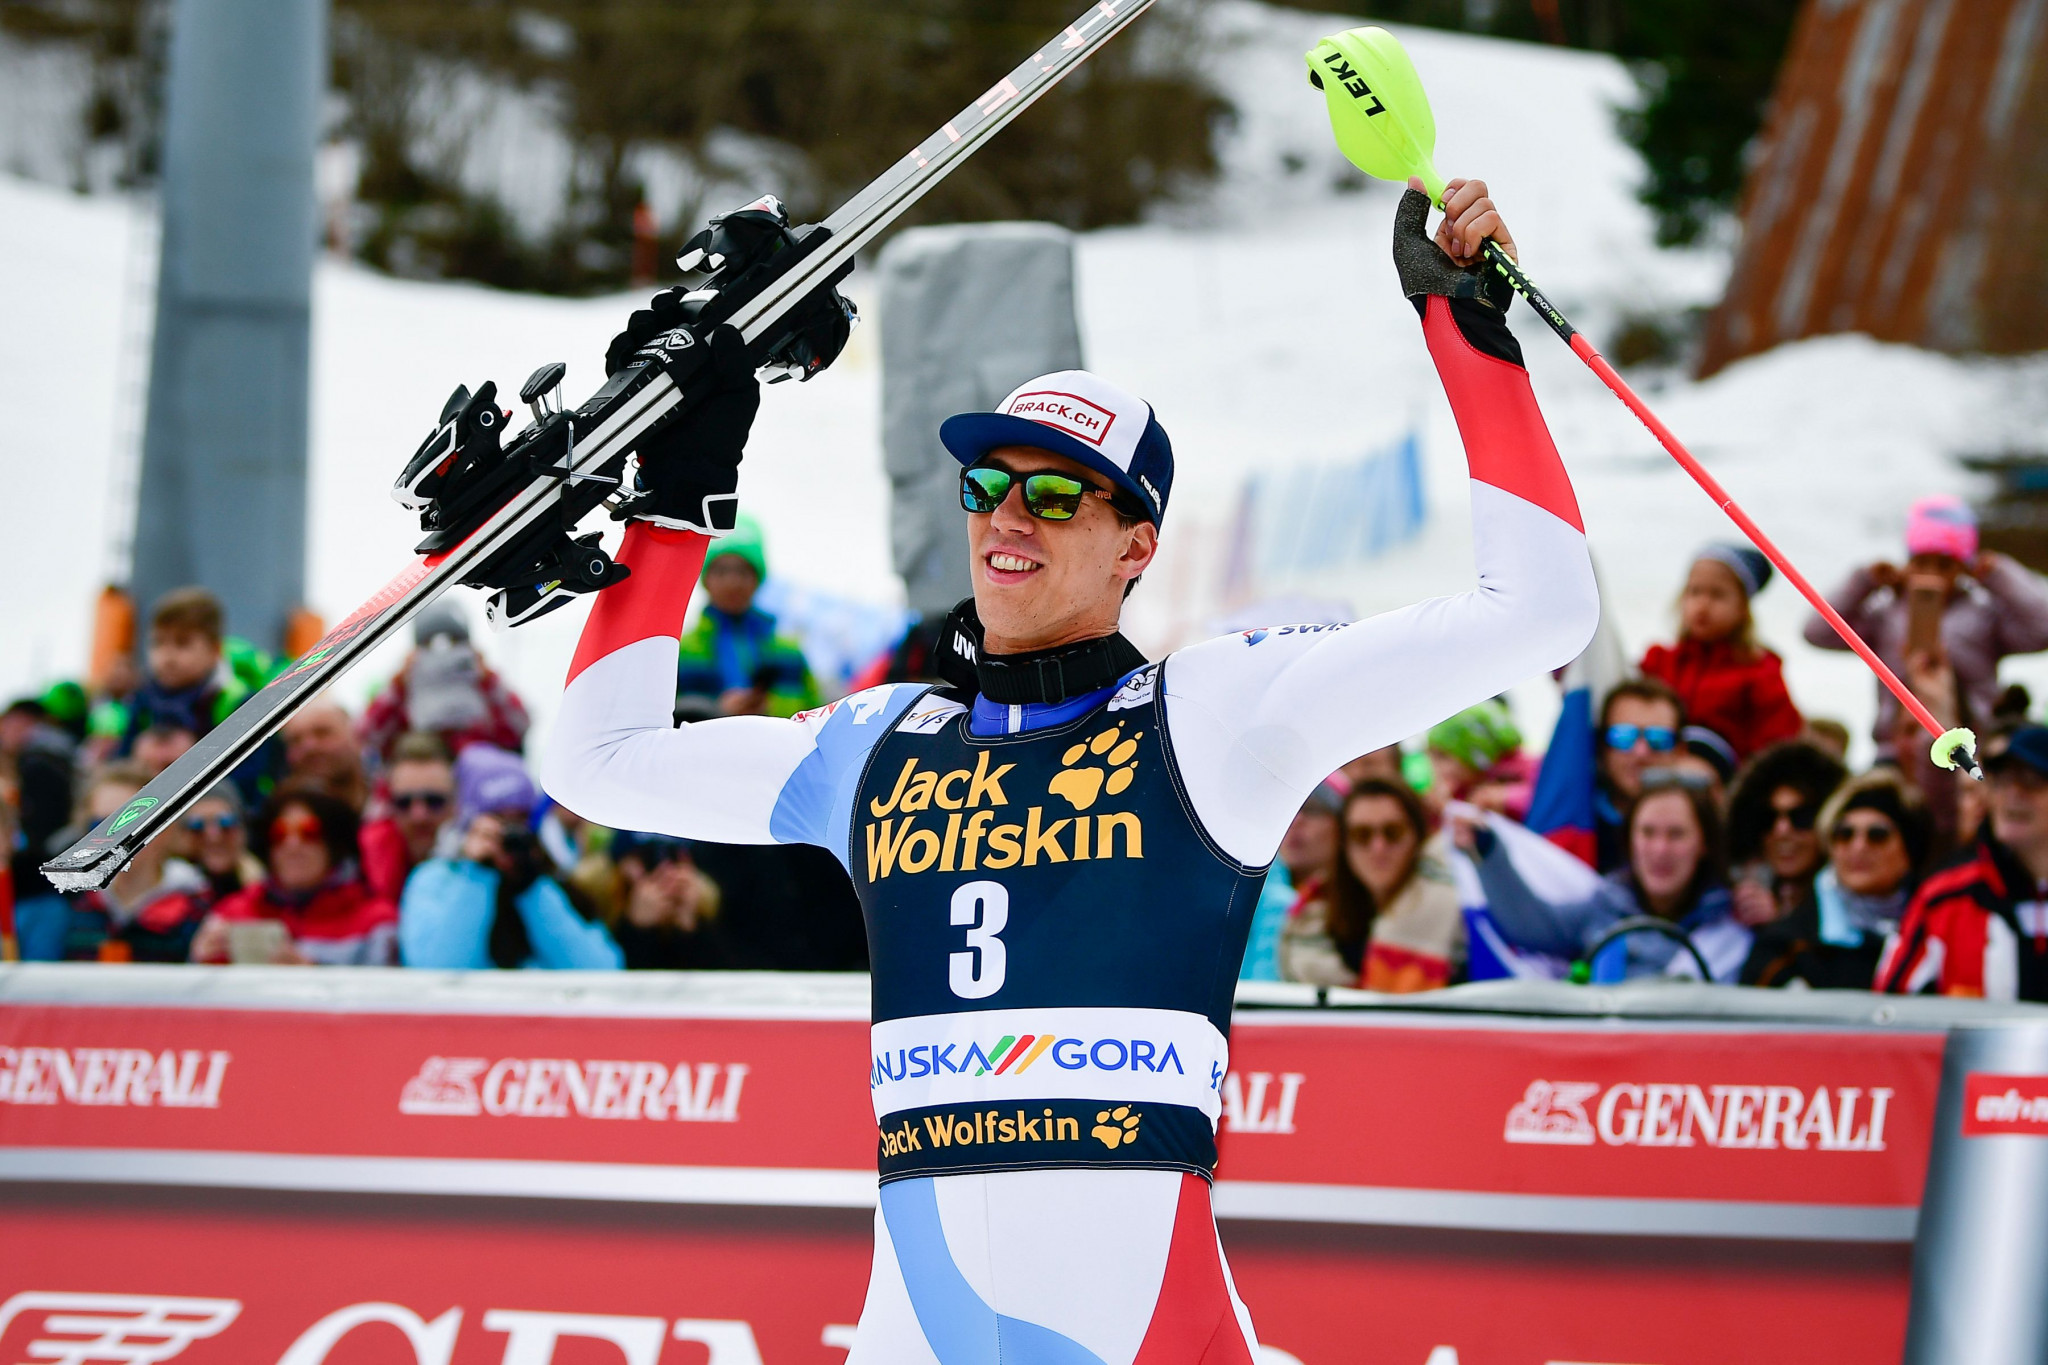 Ramon Zenhaeusern gained his first slalom World Cup victory in Kranjska Gora ©Getty Images